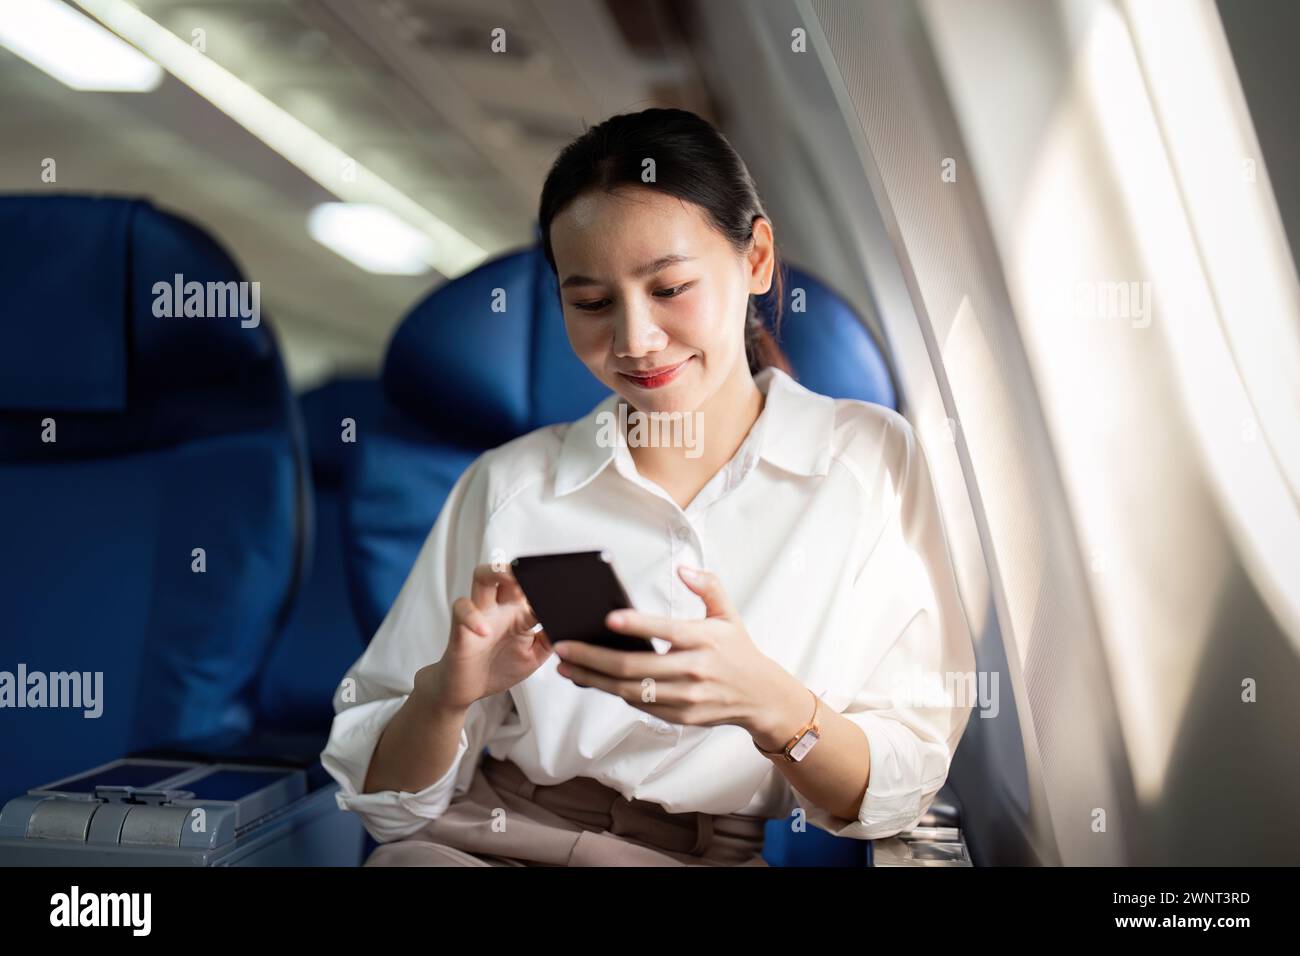 Traveling and technology. Flying at first class. Young business woman passenger using smartphone while sitting in airplane flight Stock Photo